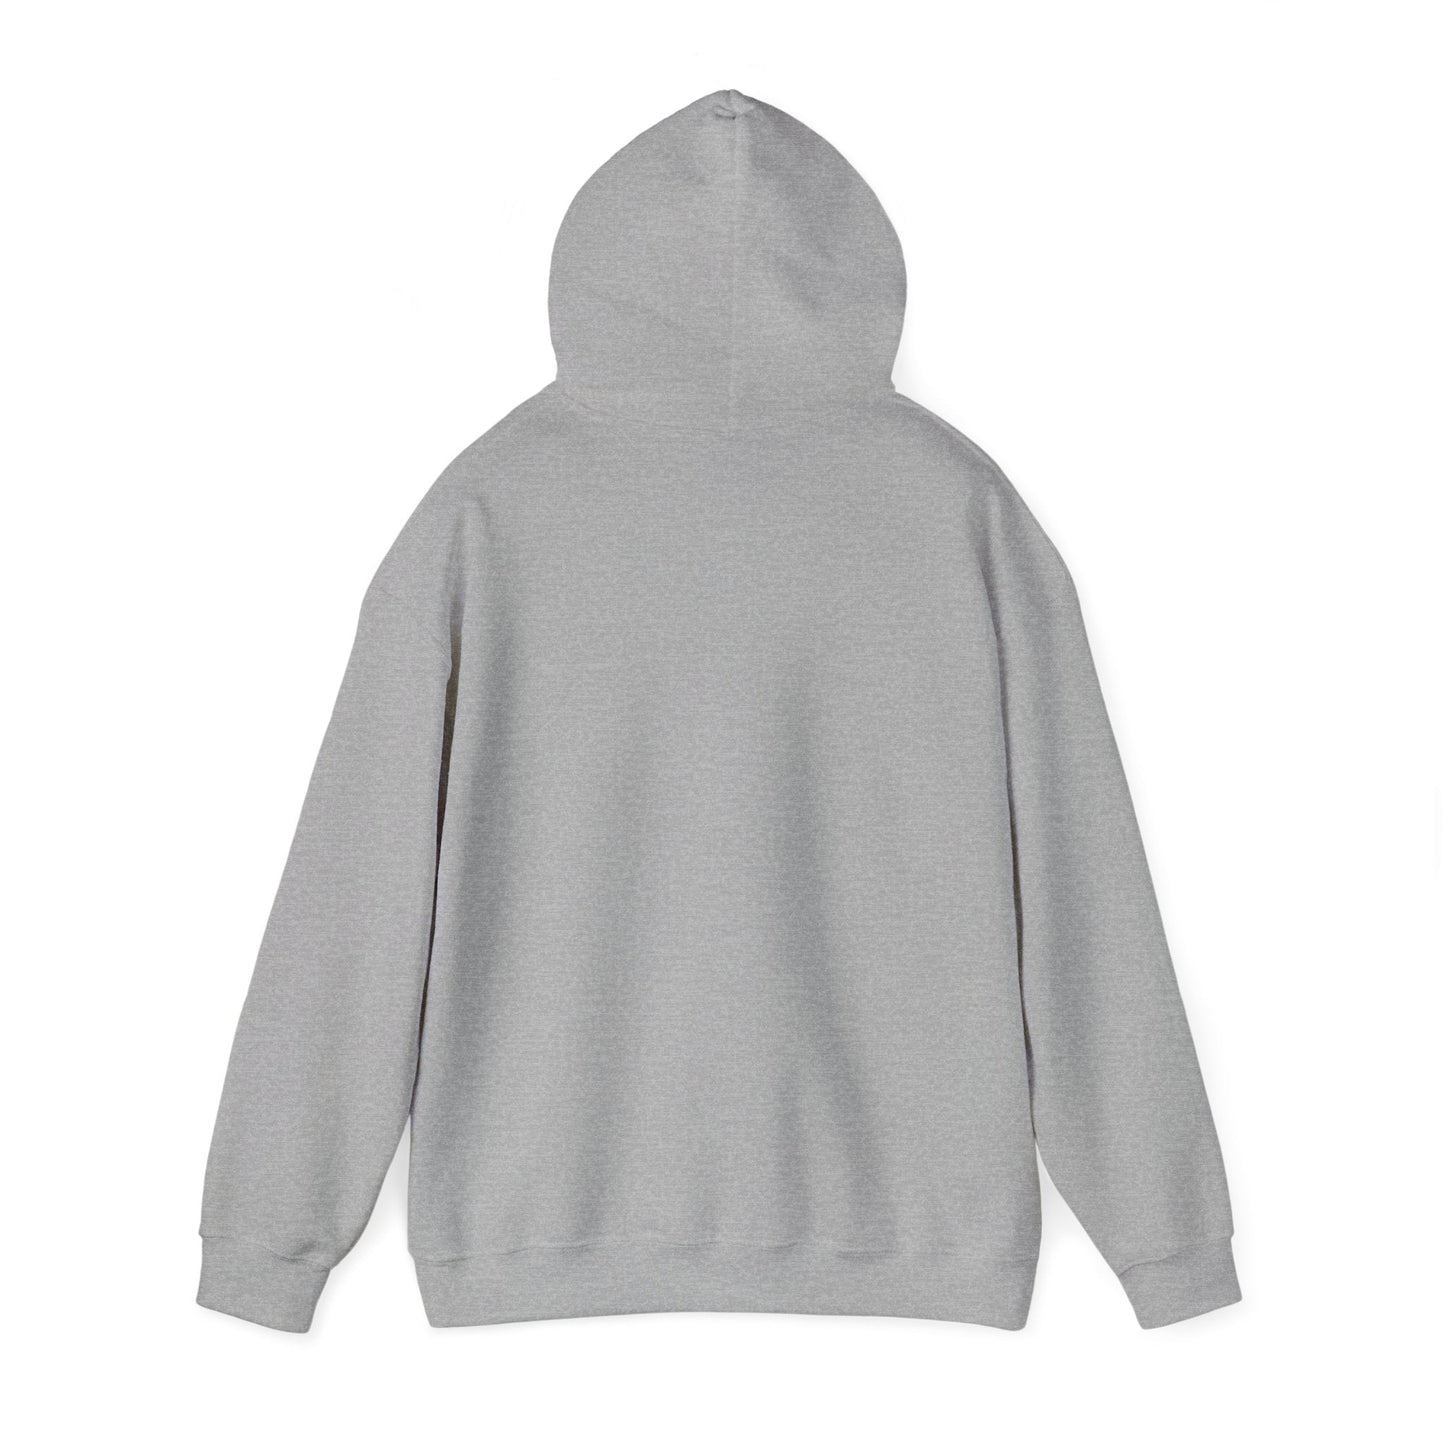 Outfique Campaign 2024 Hooded Sweatshirt | Outfique | Hoodie | DTG